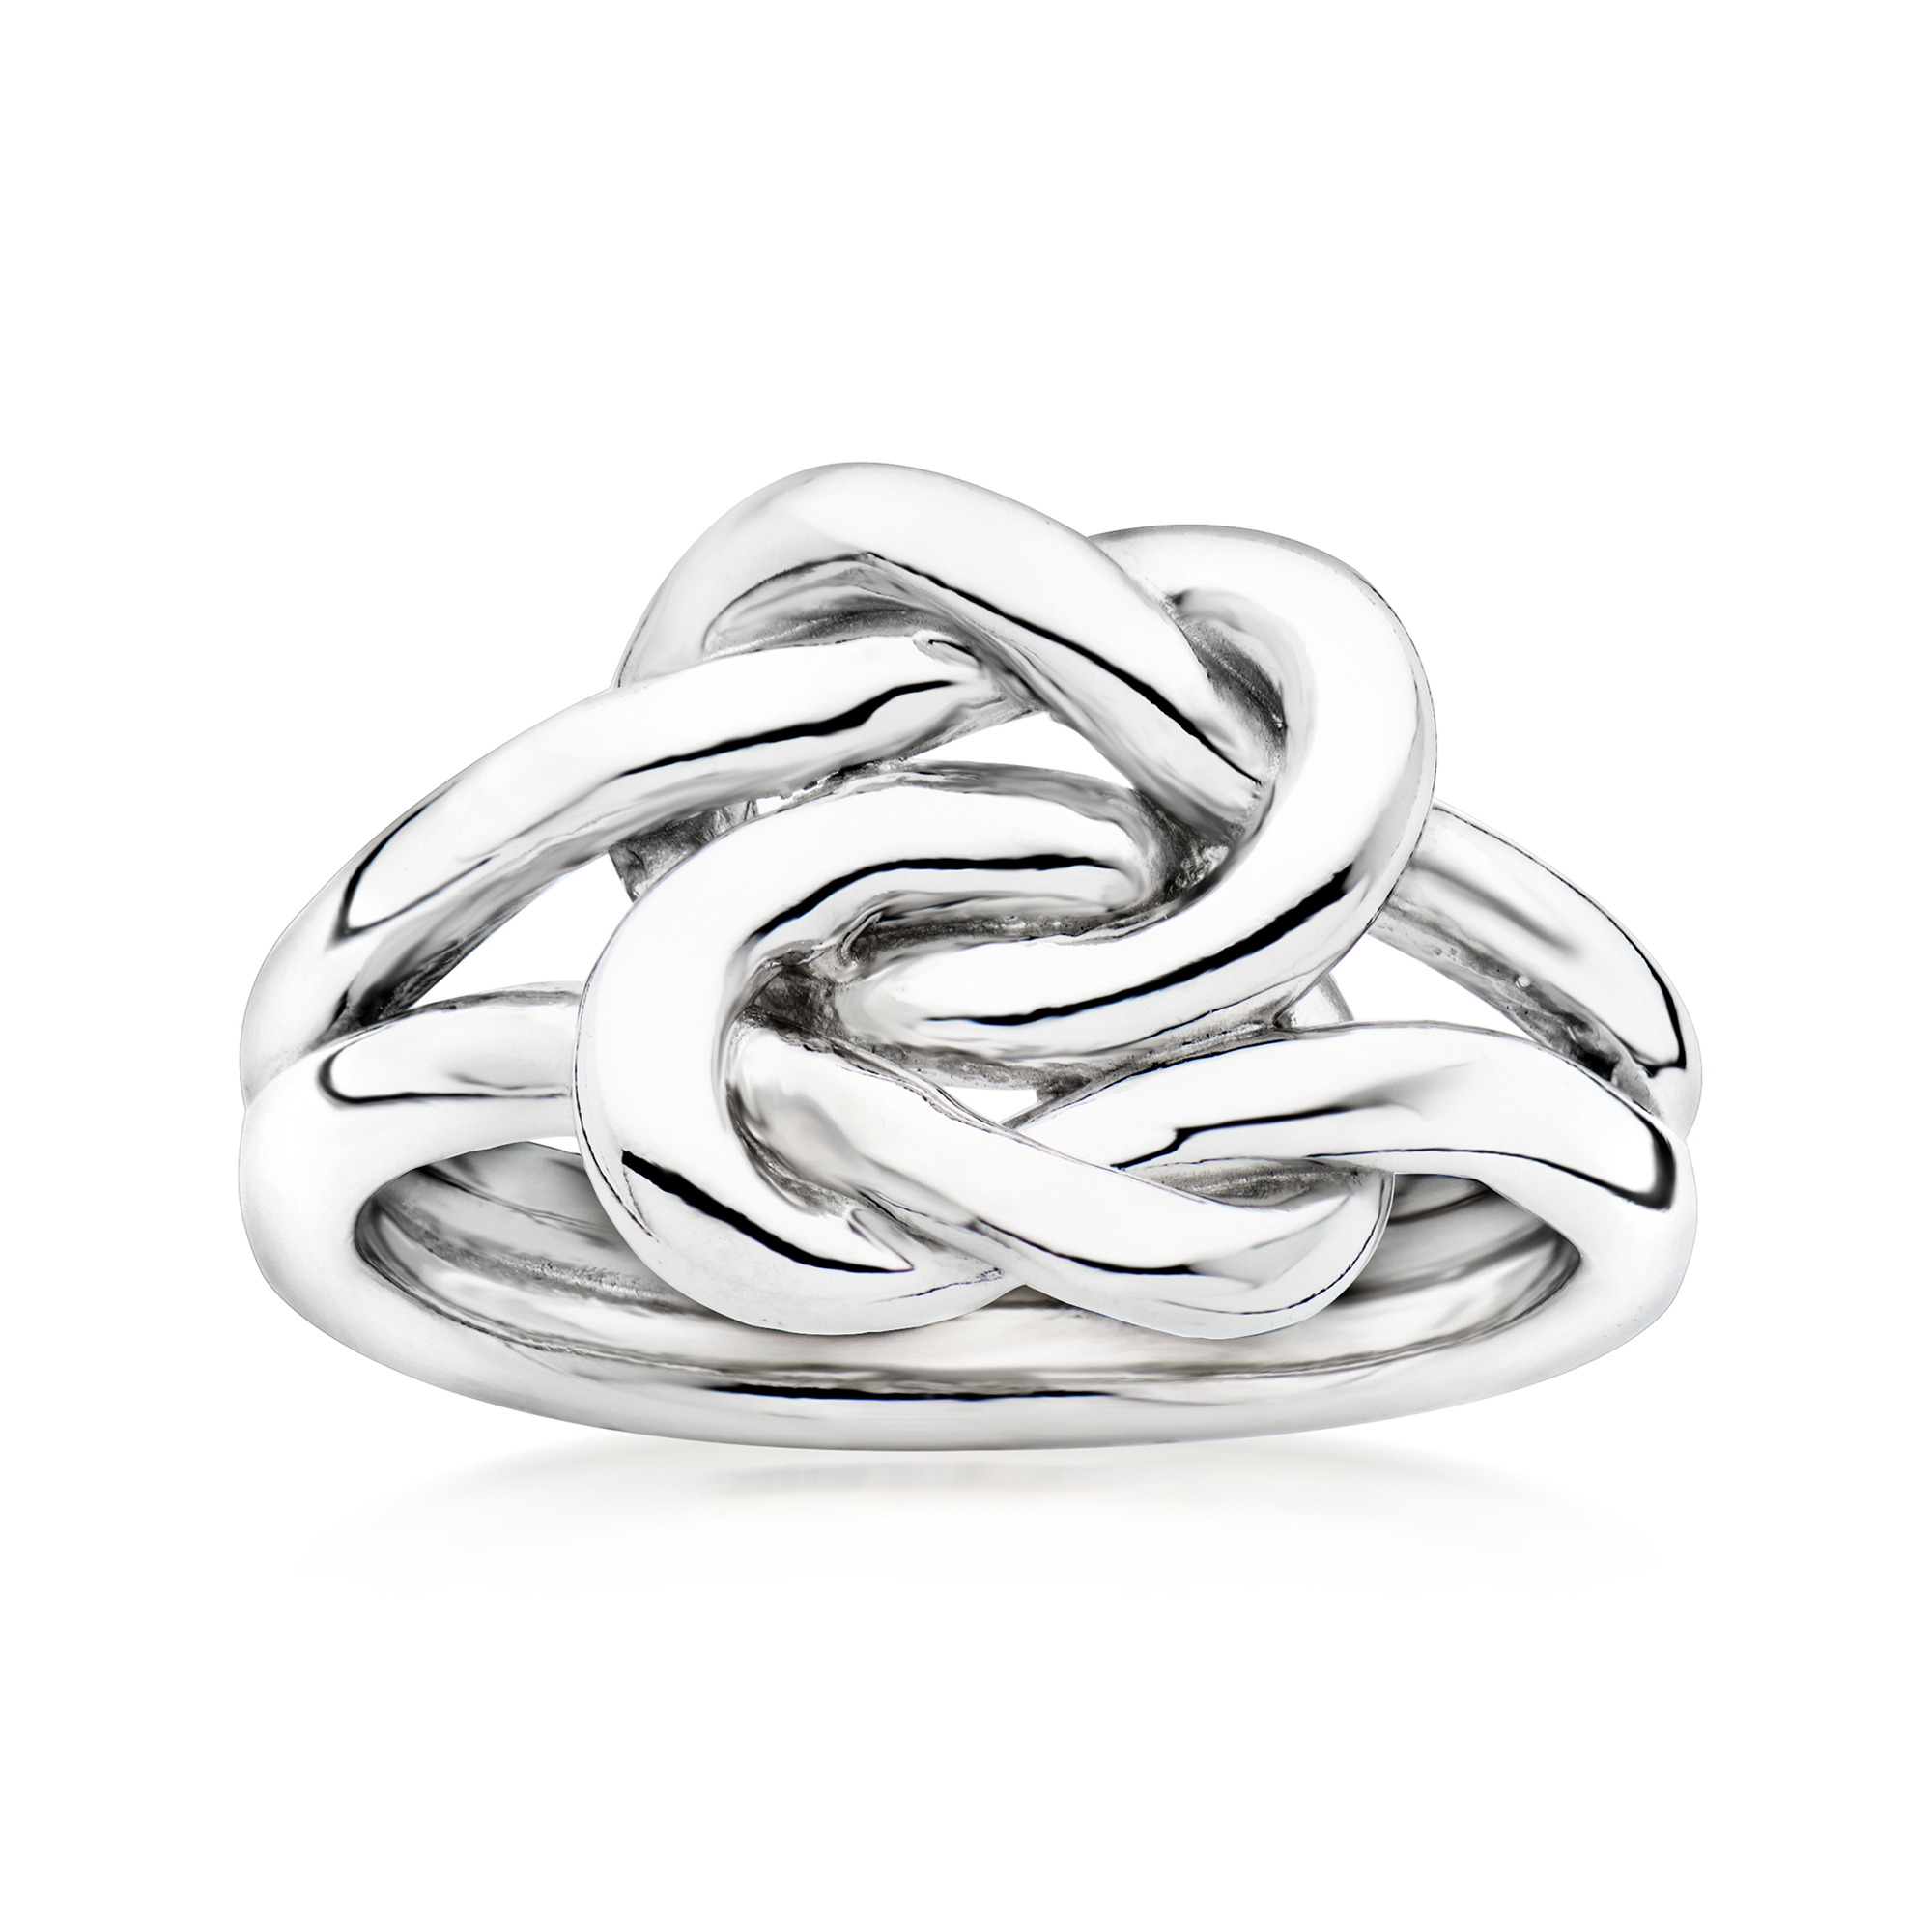 Jude Jewelers Stainless Steel Braided Woven Knot Wave Statement Anniversary Cocktail Party Ring 